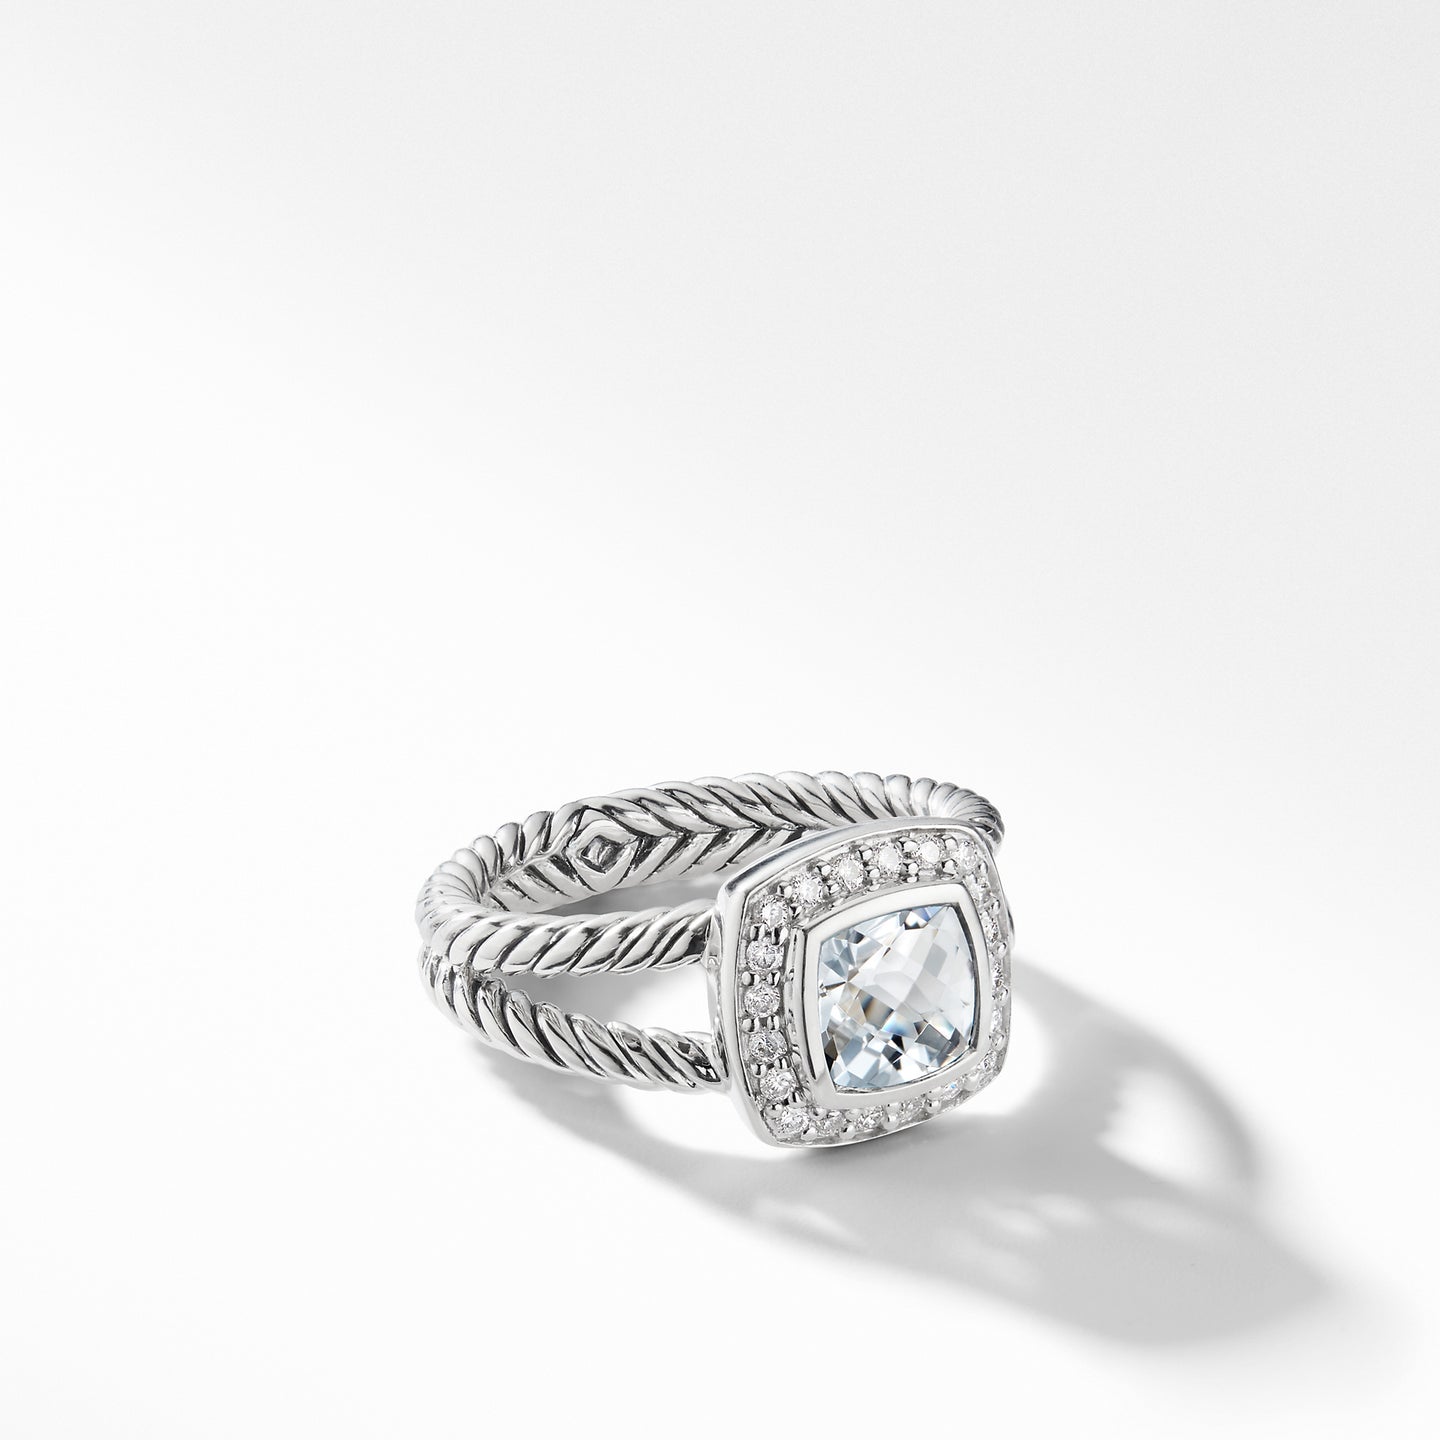 Petite Albion® Ring with White Topaz and Diamonds, Size 8